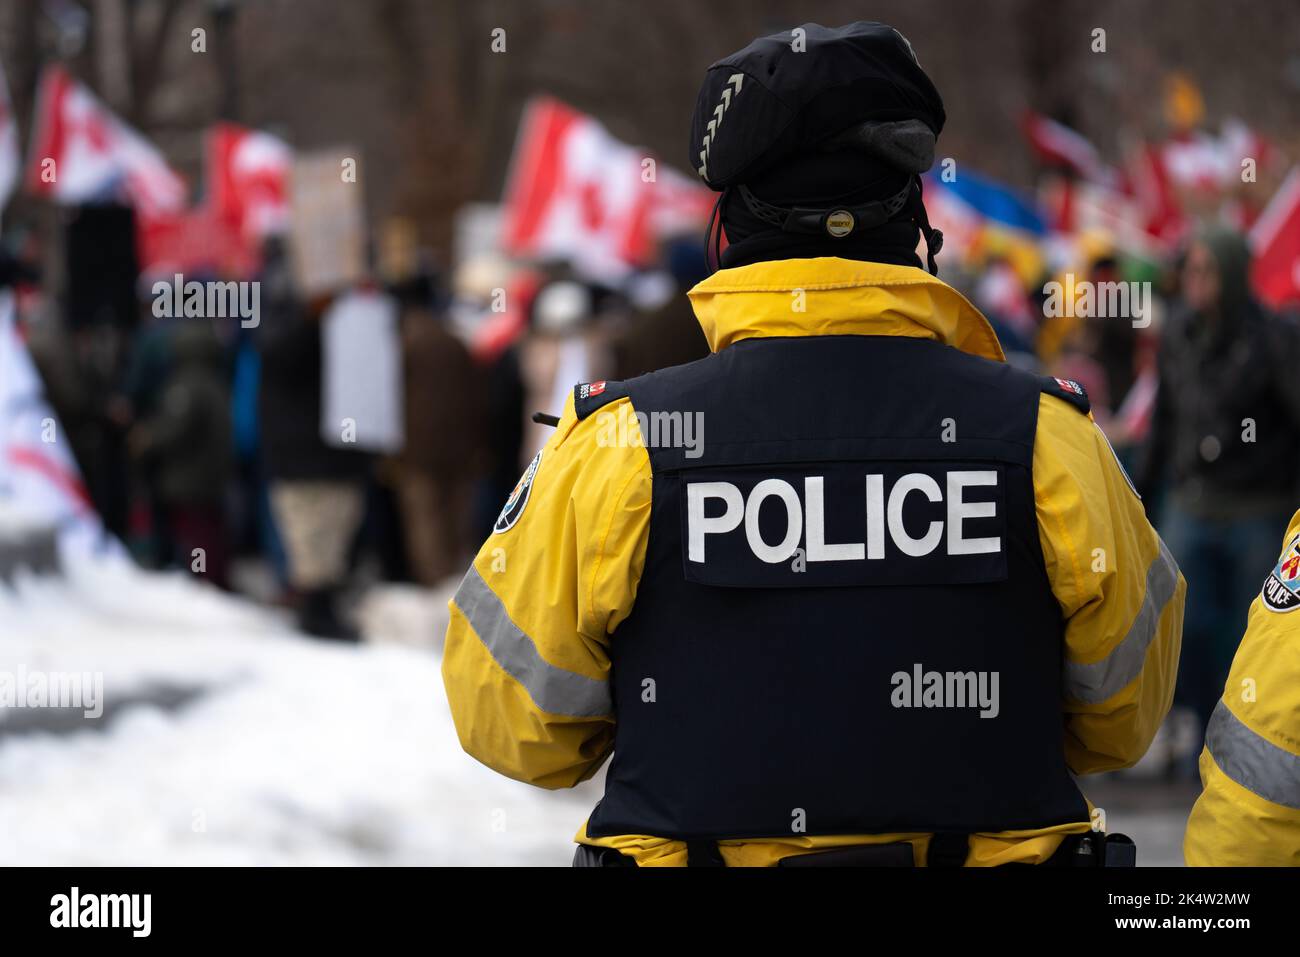 Police officer wearing a black vest and a yellow jacket while on duty patrolling the streets of Toronto at Queen's Park anti-vaccination mandate rally. Stock Photo